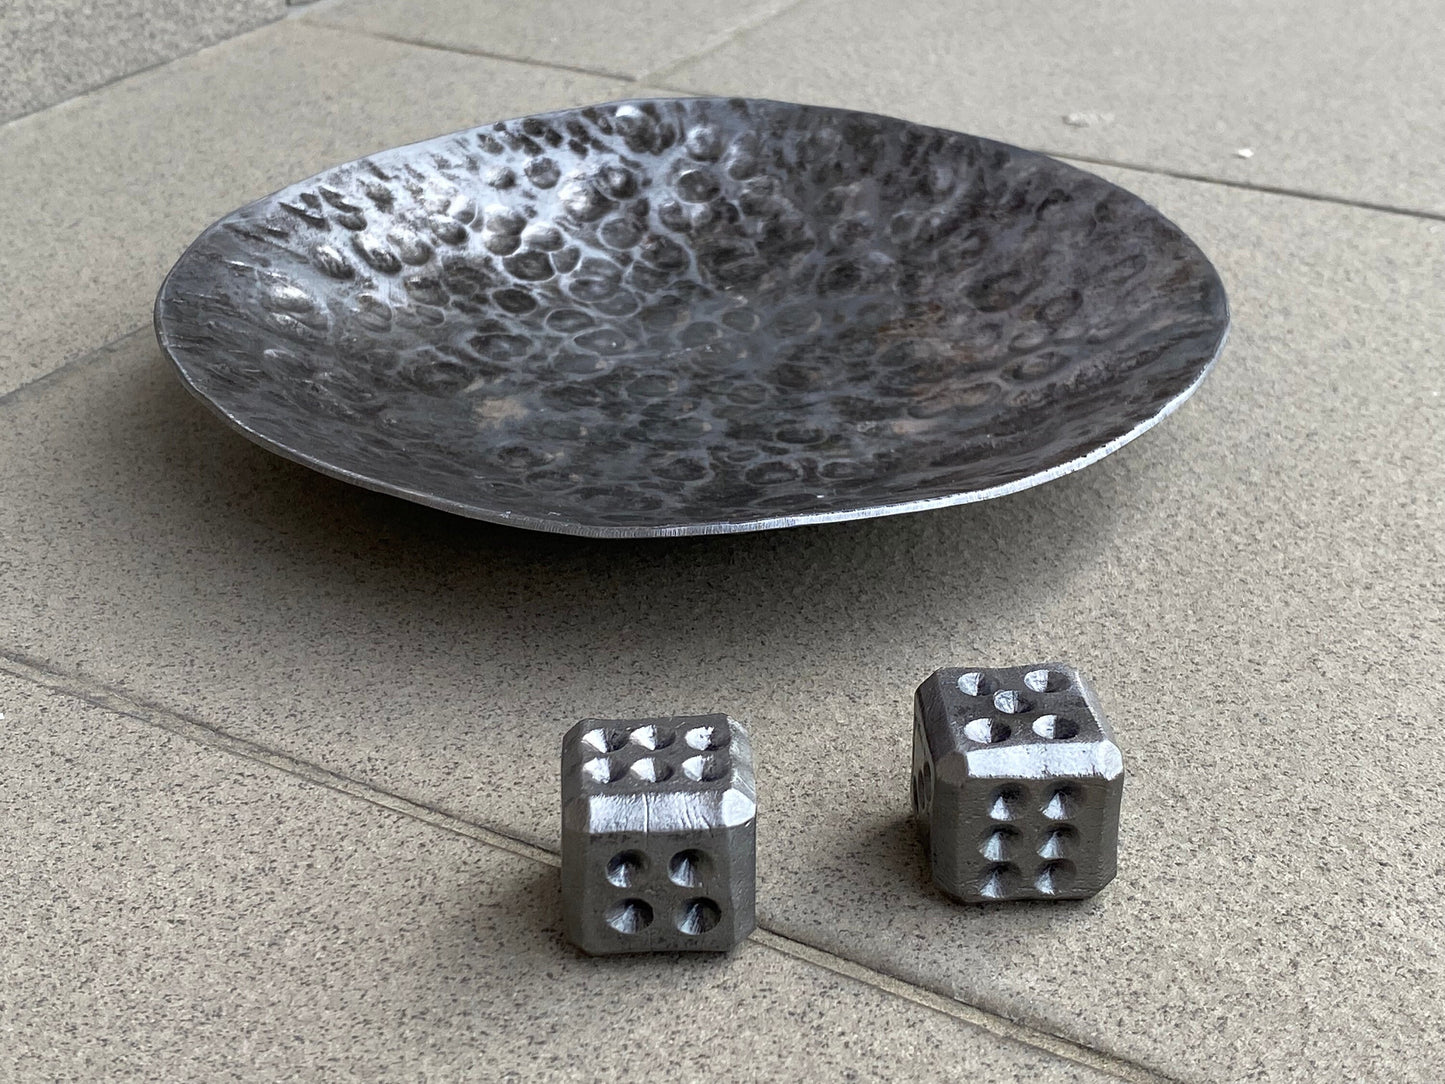 Dices, personalized tray, personalized bowl, tray, bowl, 6th anniversary, 11th anniversary, dice game, steel gift, iron gift, dice box